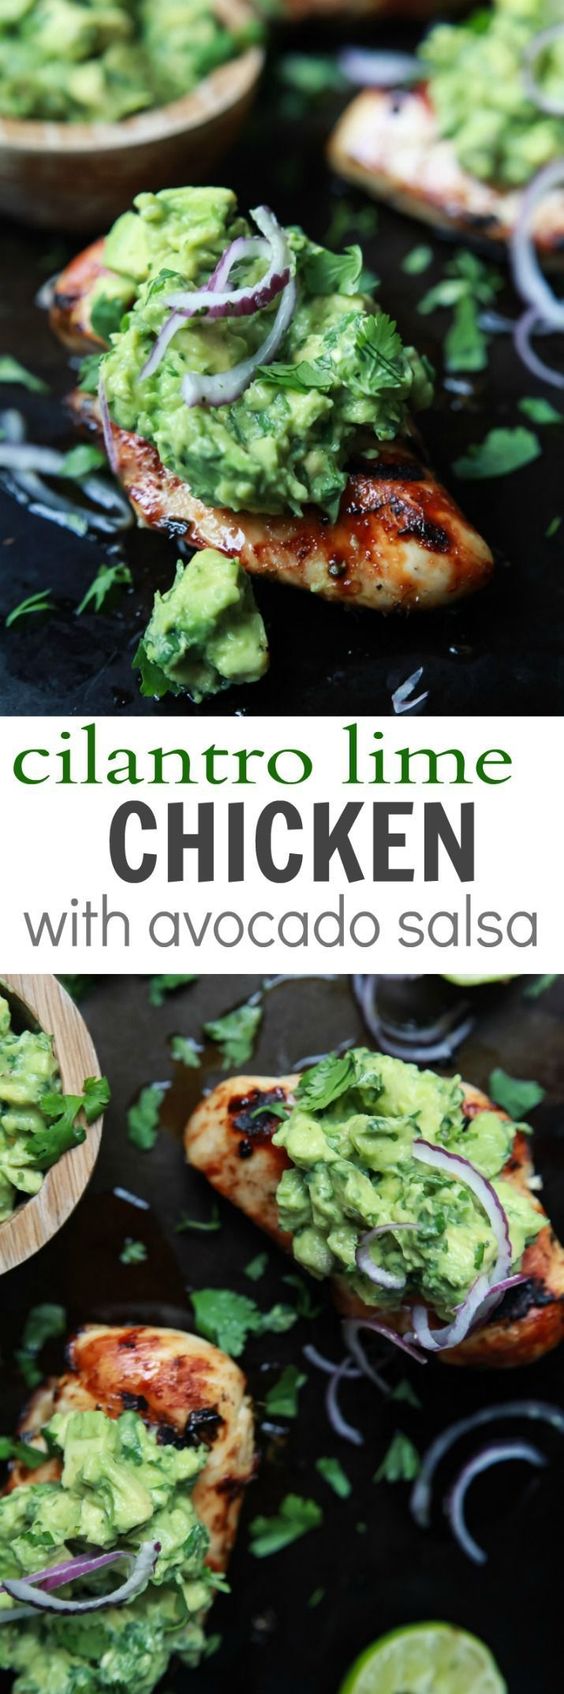 The-Best-Healthy-Cilantro-Lime-Chicken-with-Avocado-Salsa